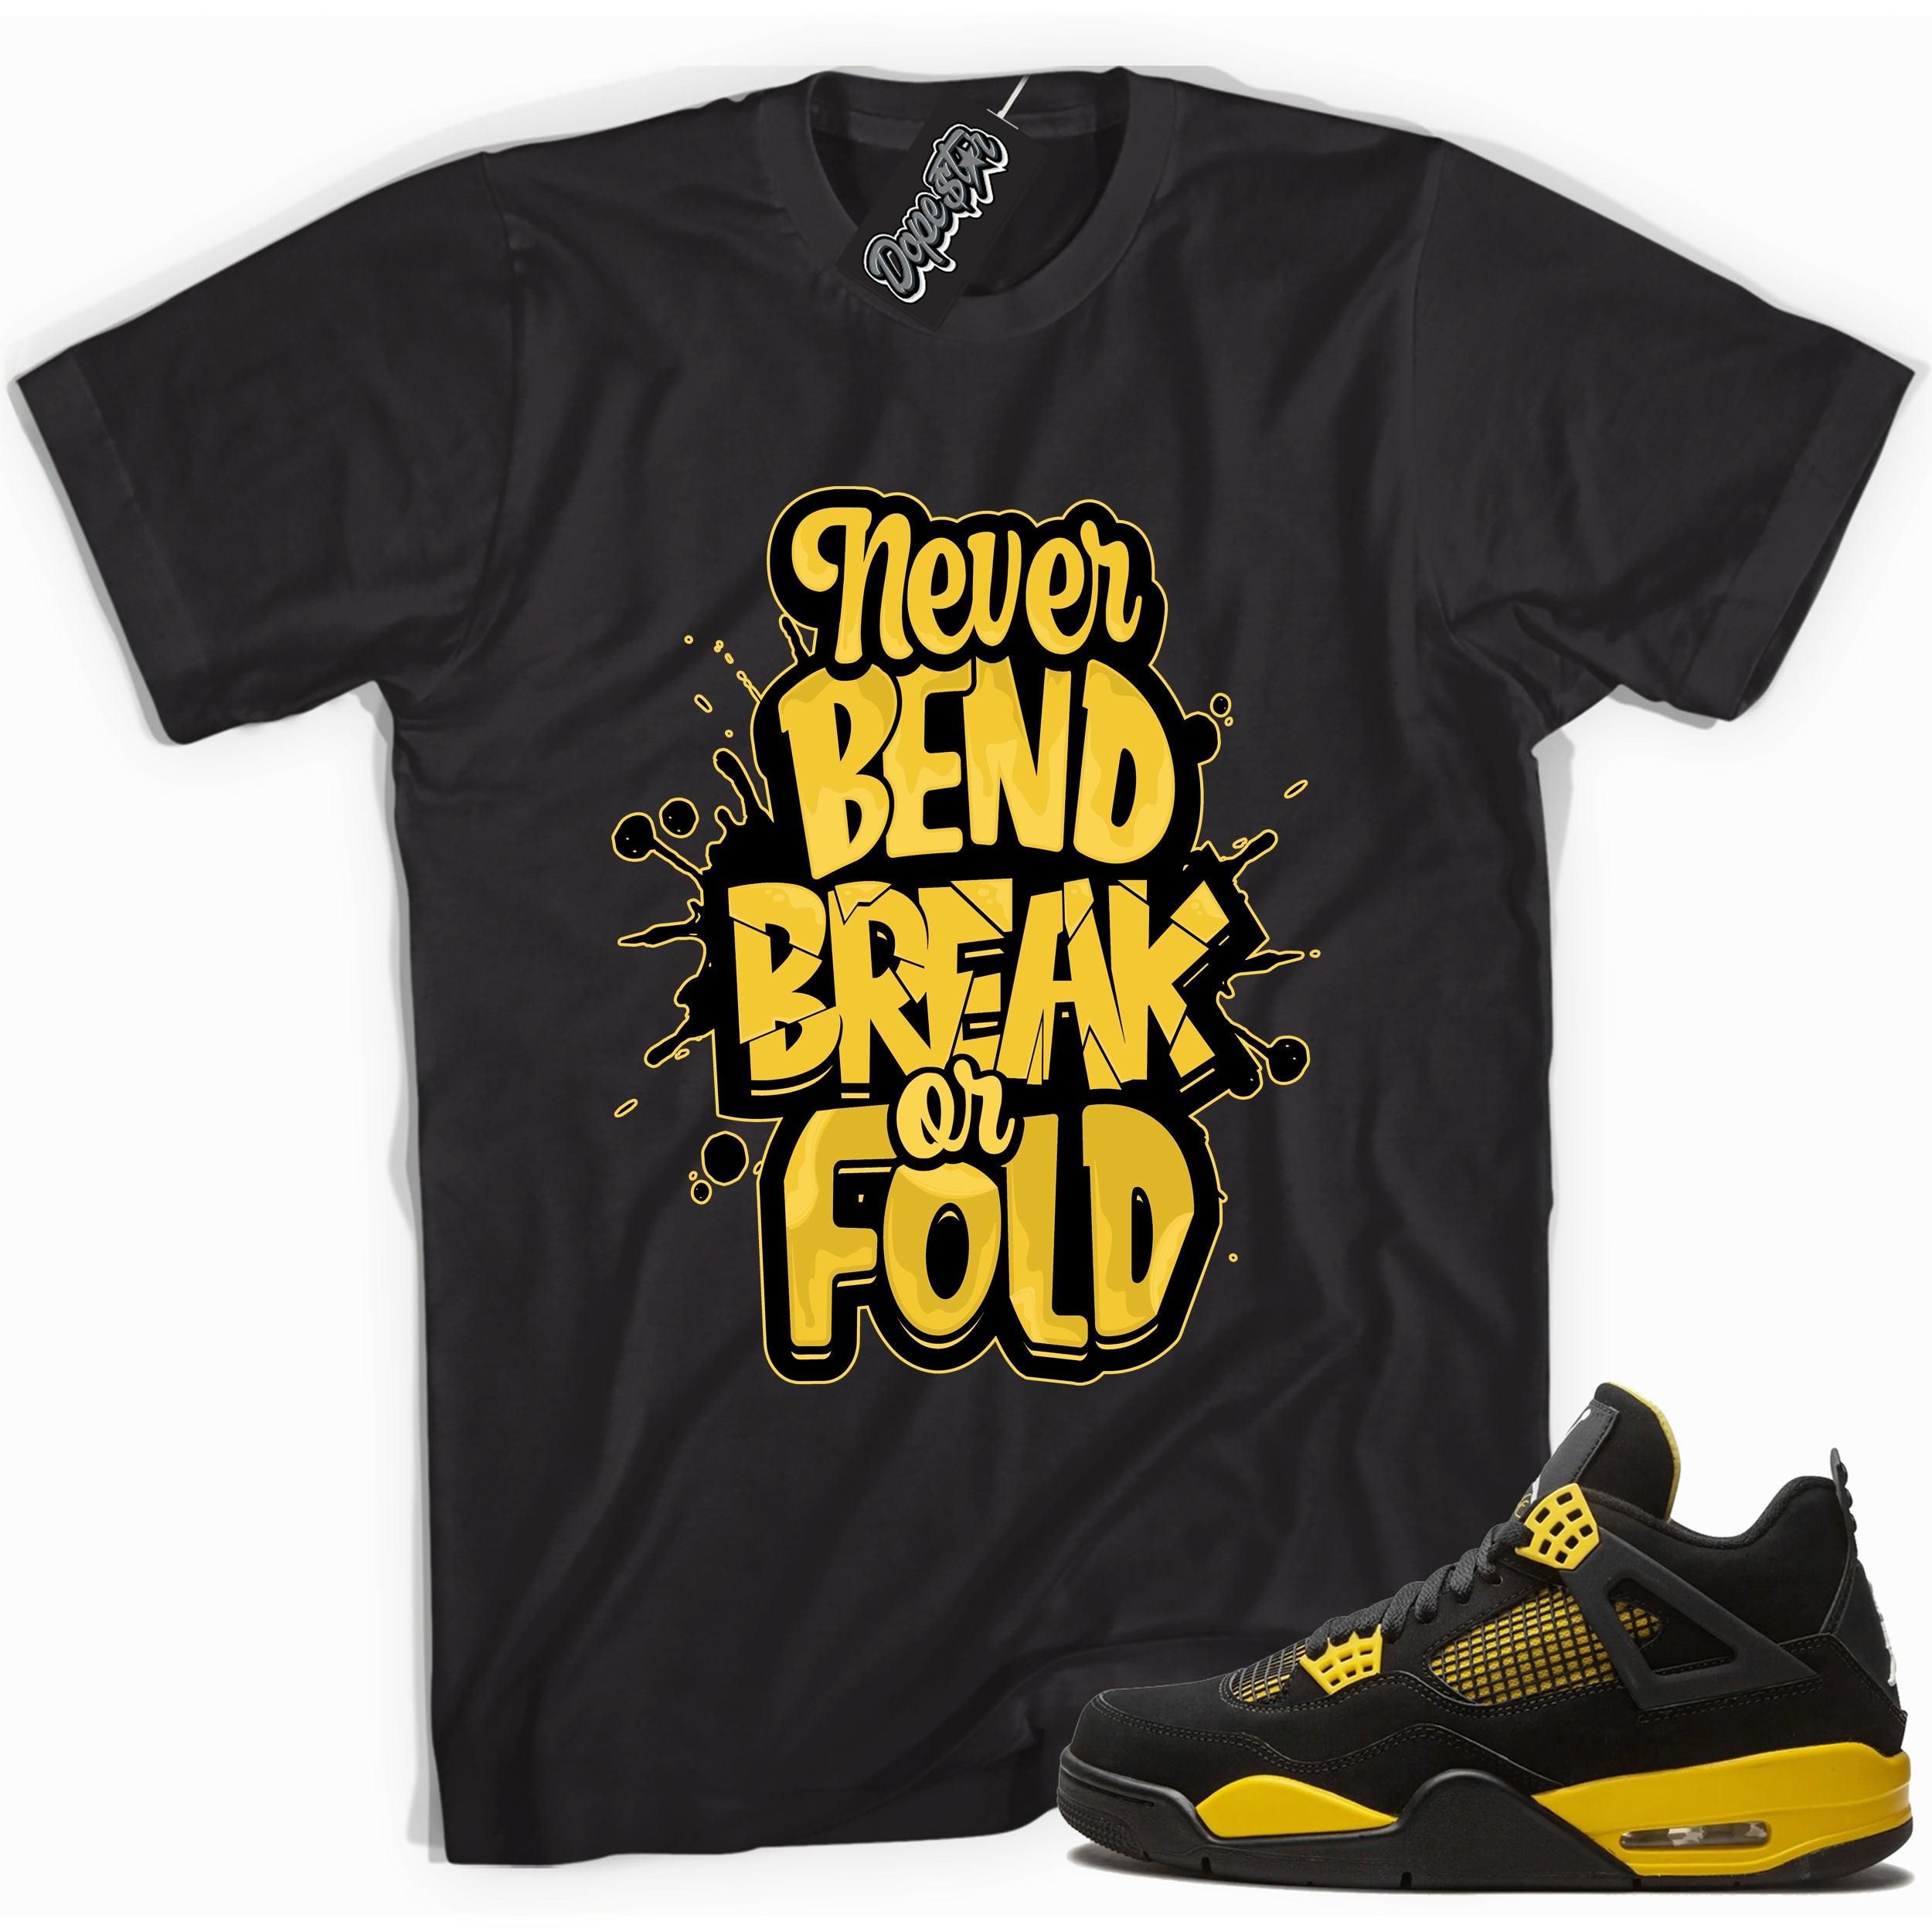 Cool black graphic tee with 'never bend break or fold' print, that perfectly matches  Air Jordan 4 Thunder sneakers